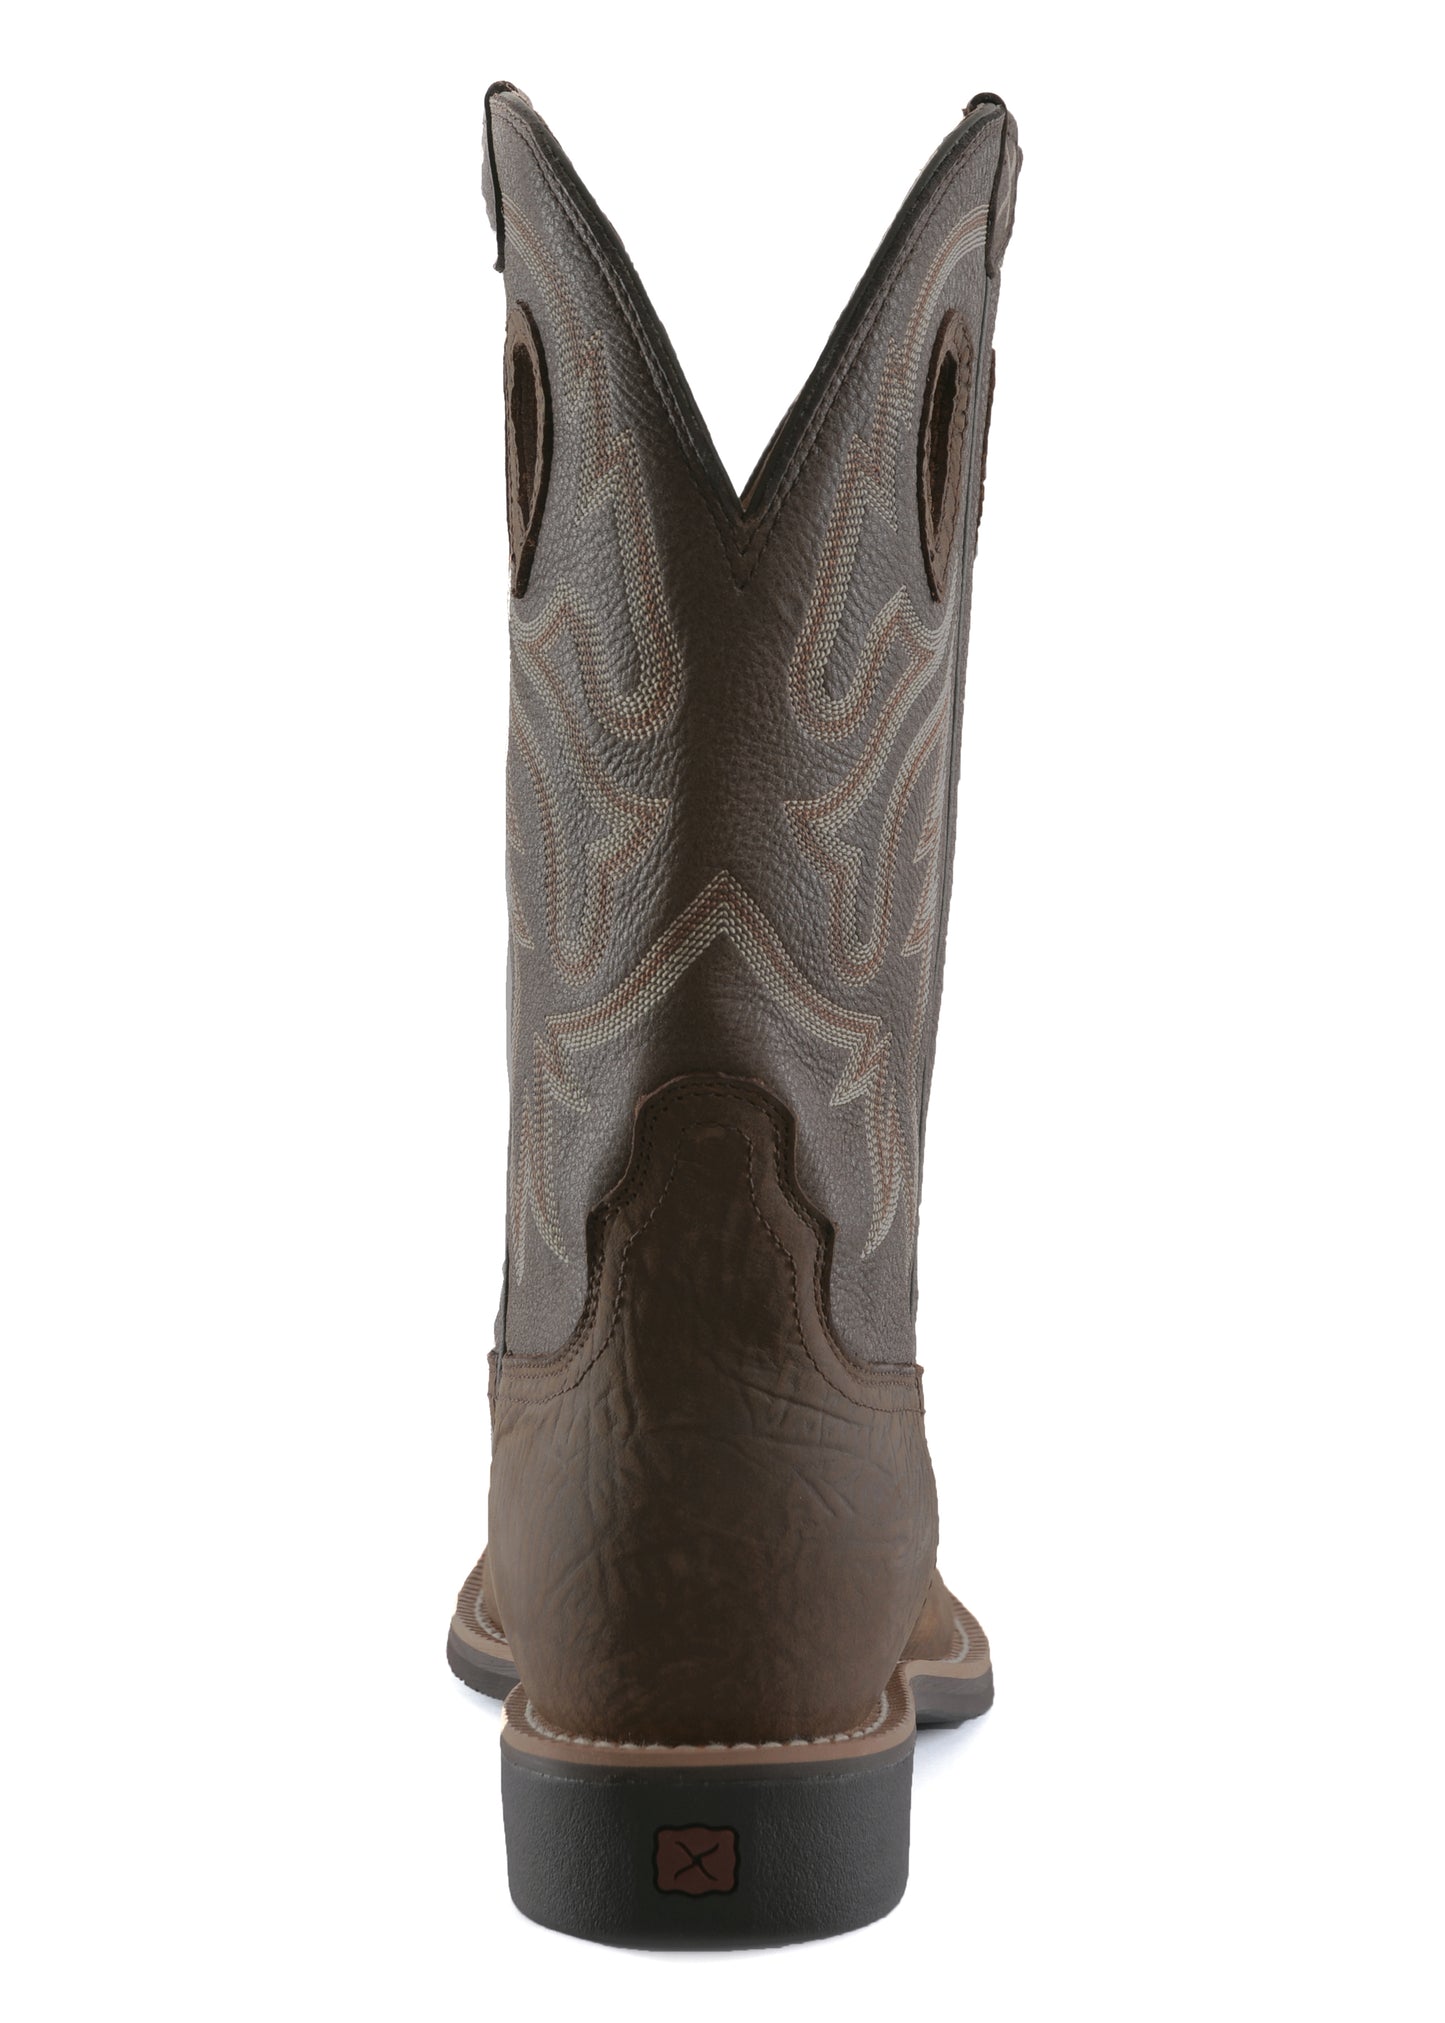 Twisted X Mens Top Hand Boot - Taupe/Brown - TCMTH0025